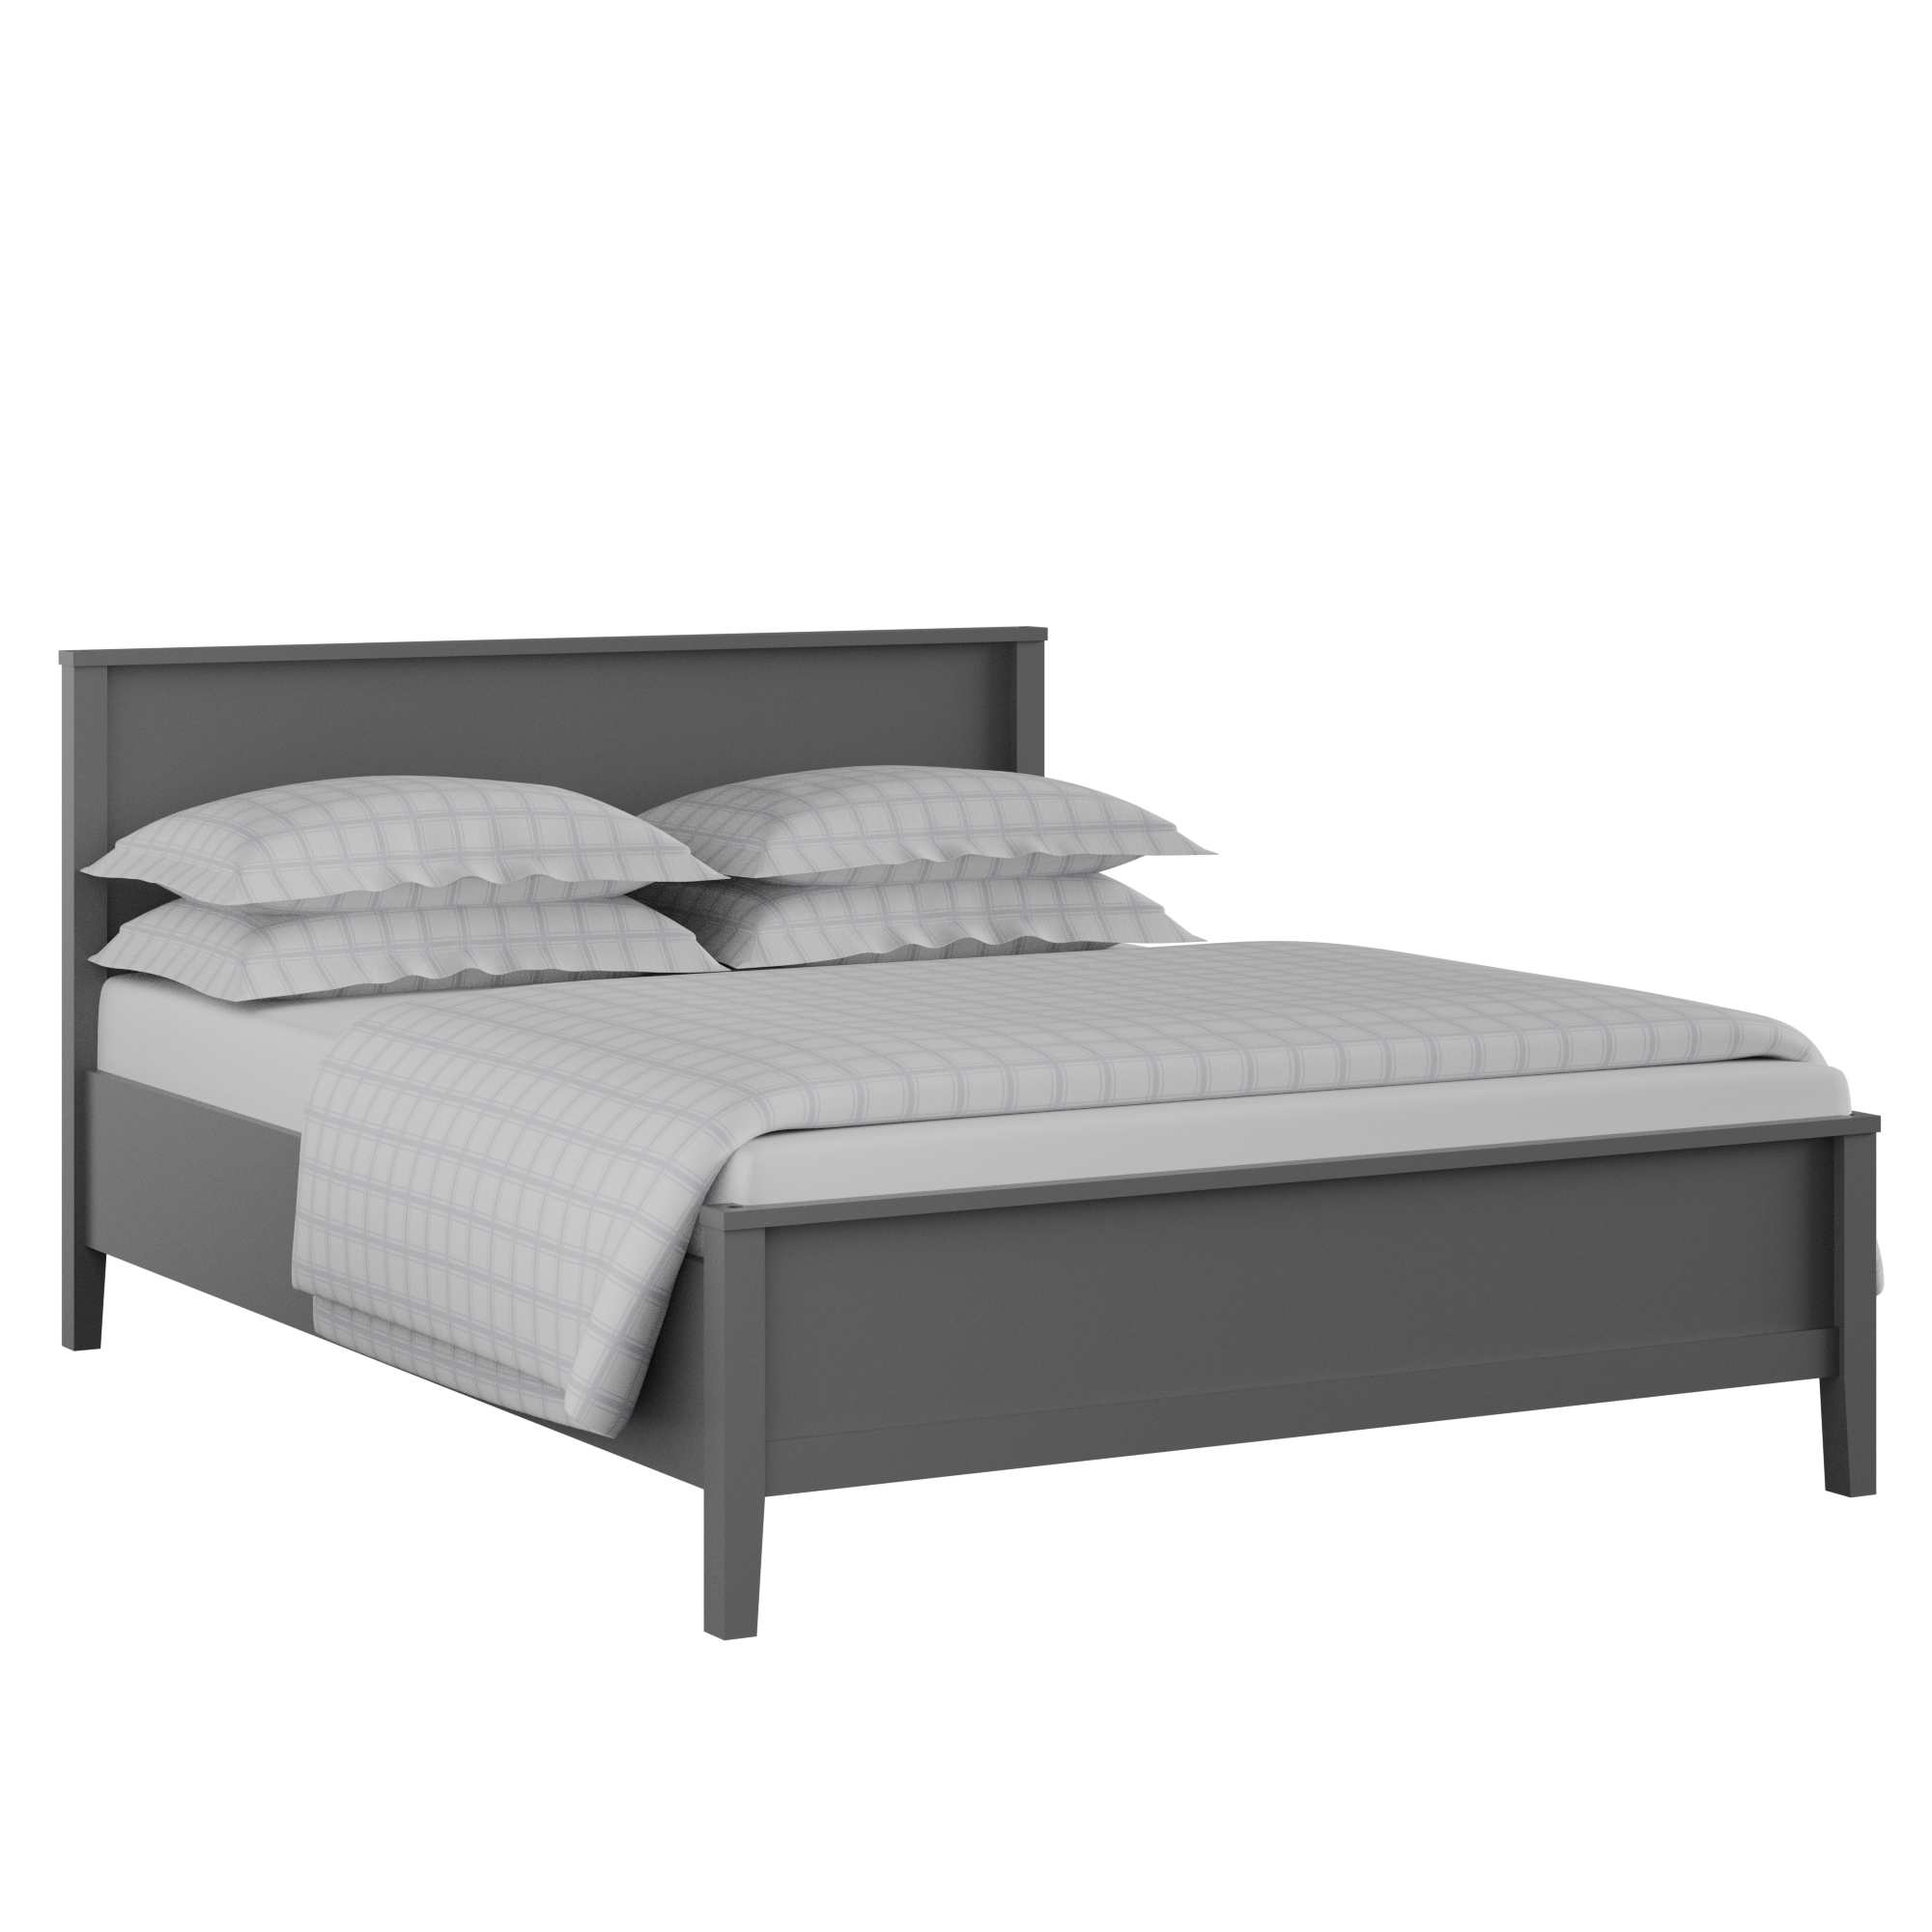 Ramsay Painted painted wood bed in grey with Juno mattress